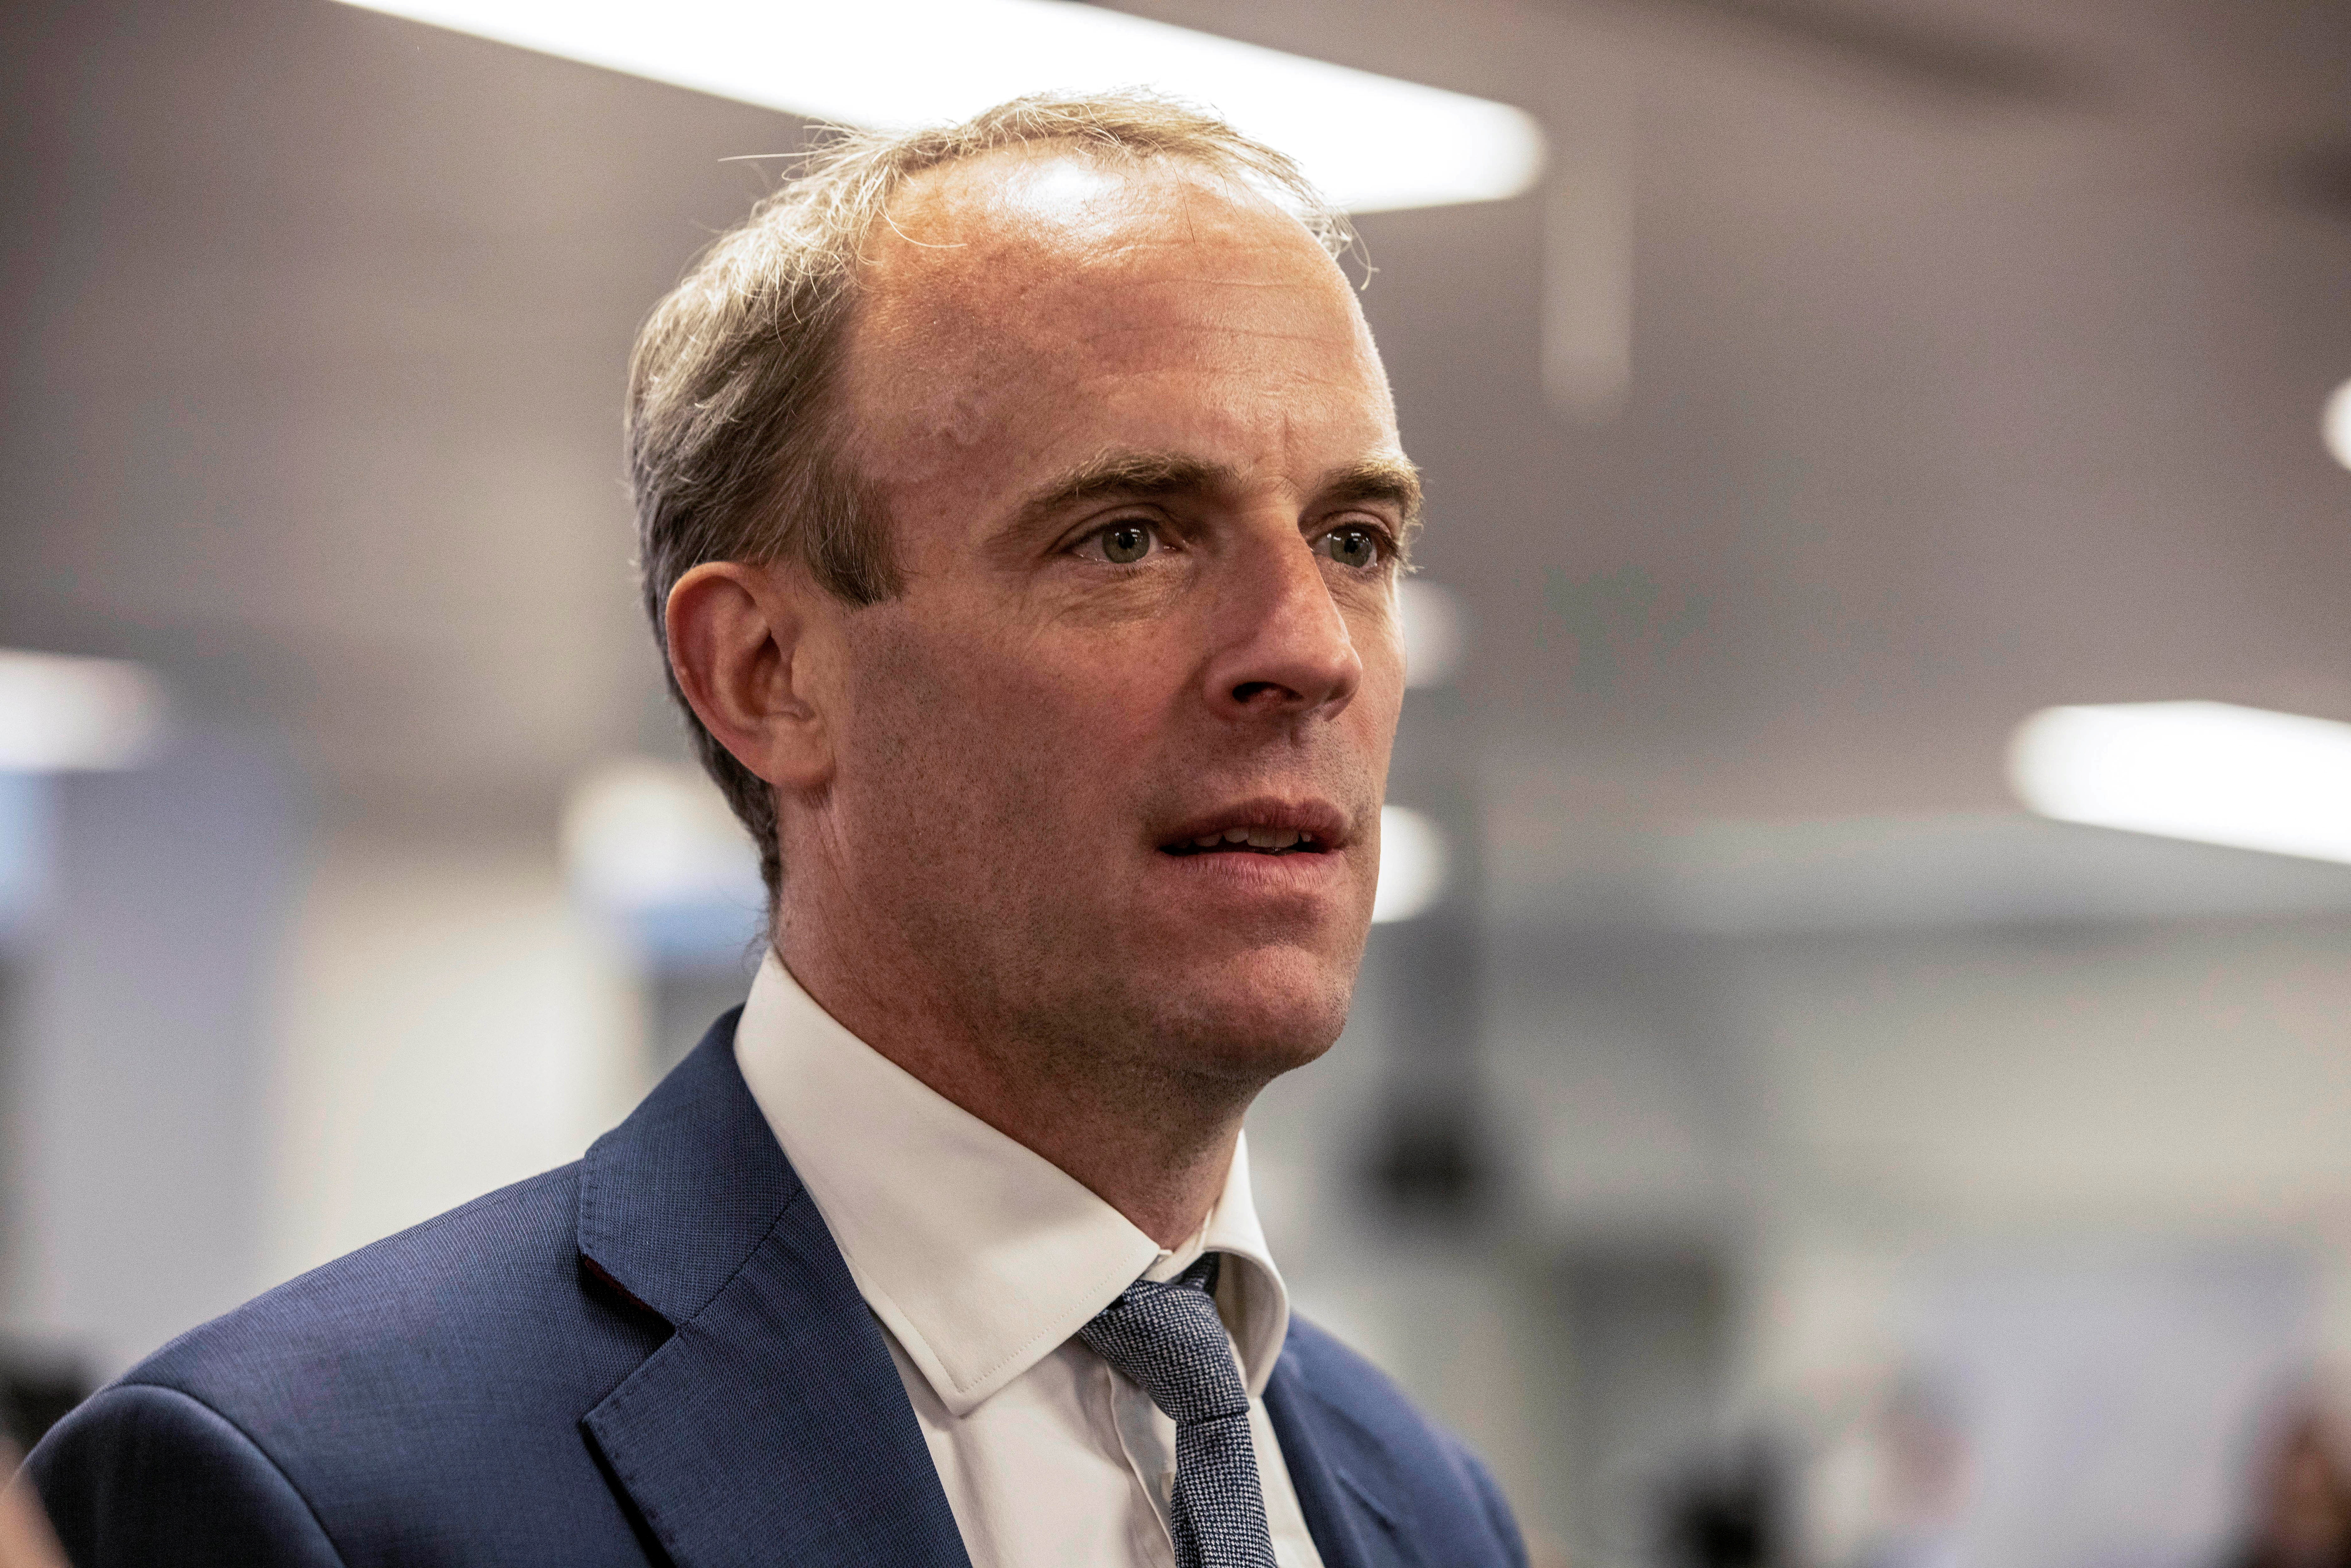 Britain's PM Johnson and Foreign Secretary Raab visit FCDO Crisis Centre in London